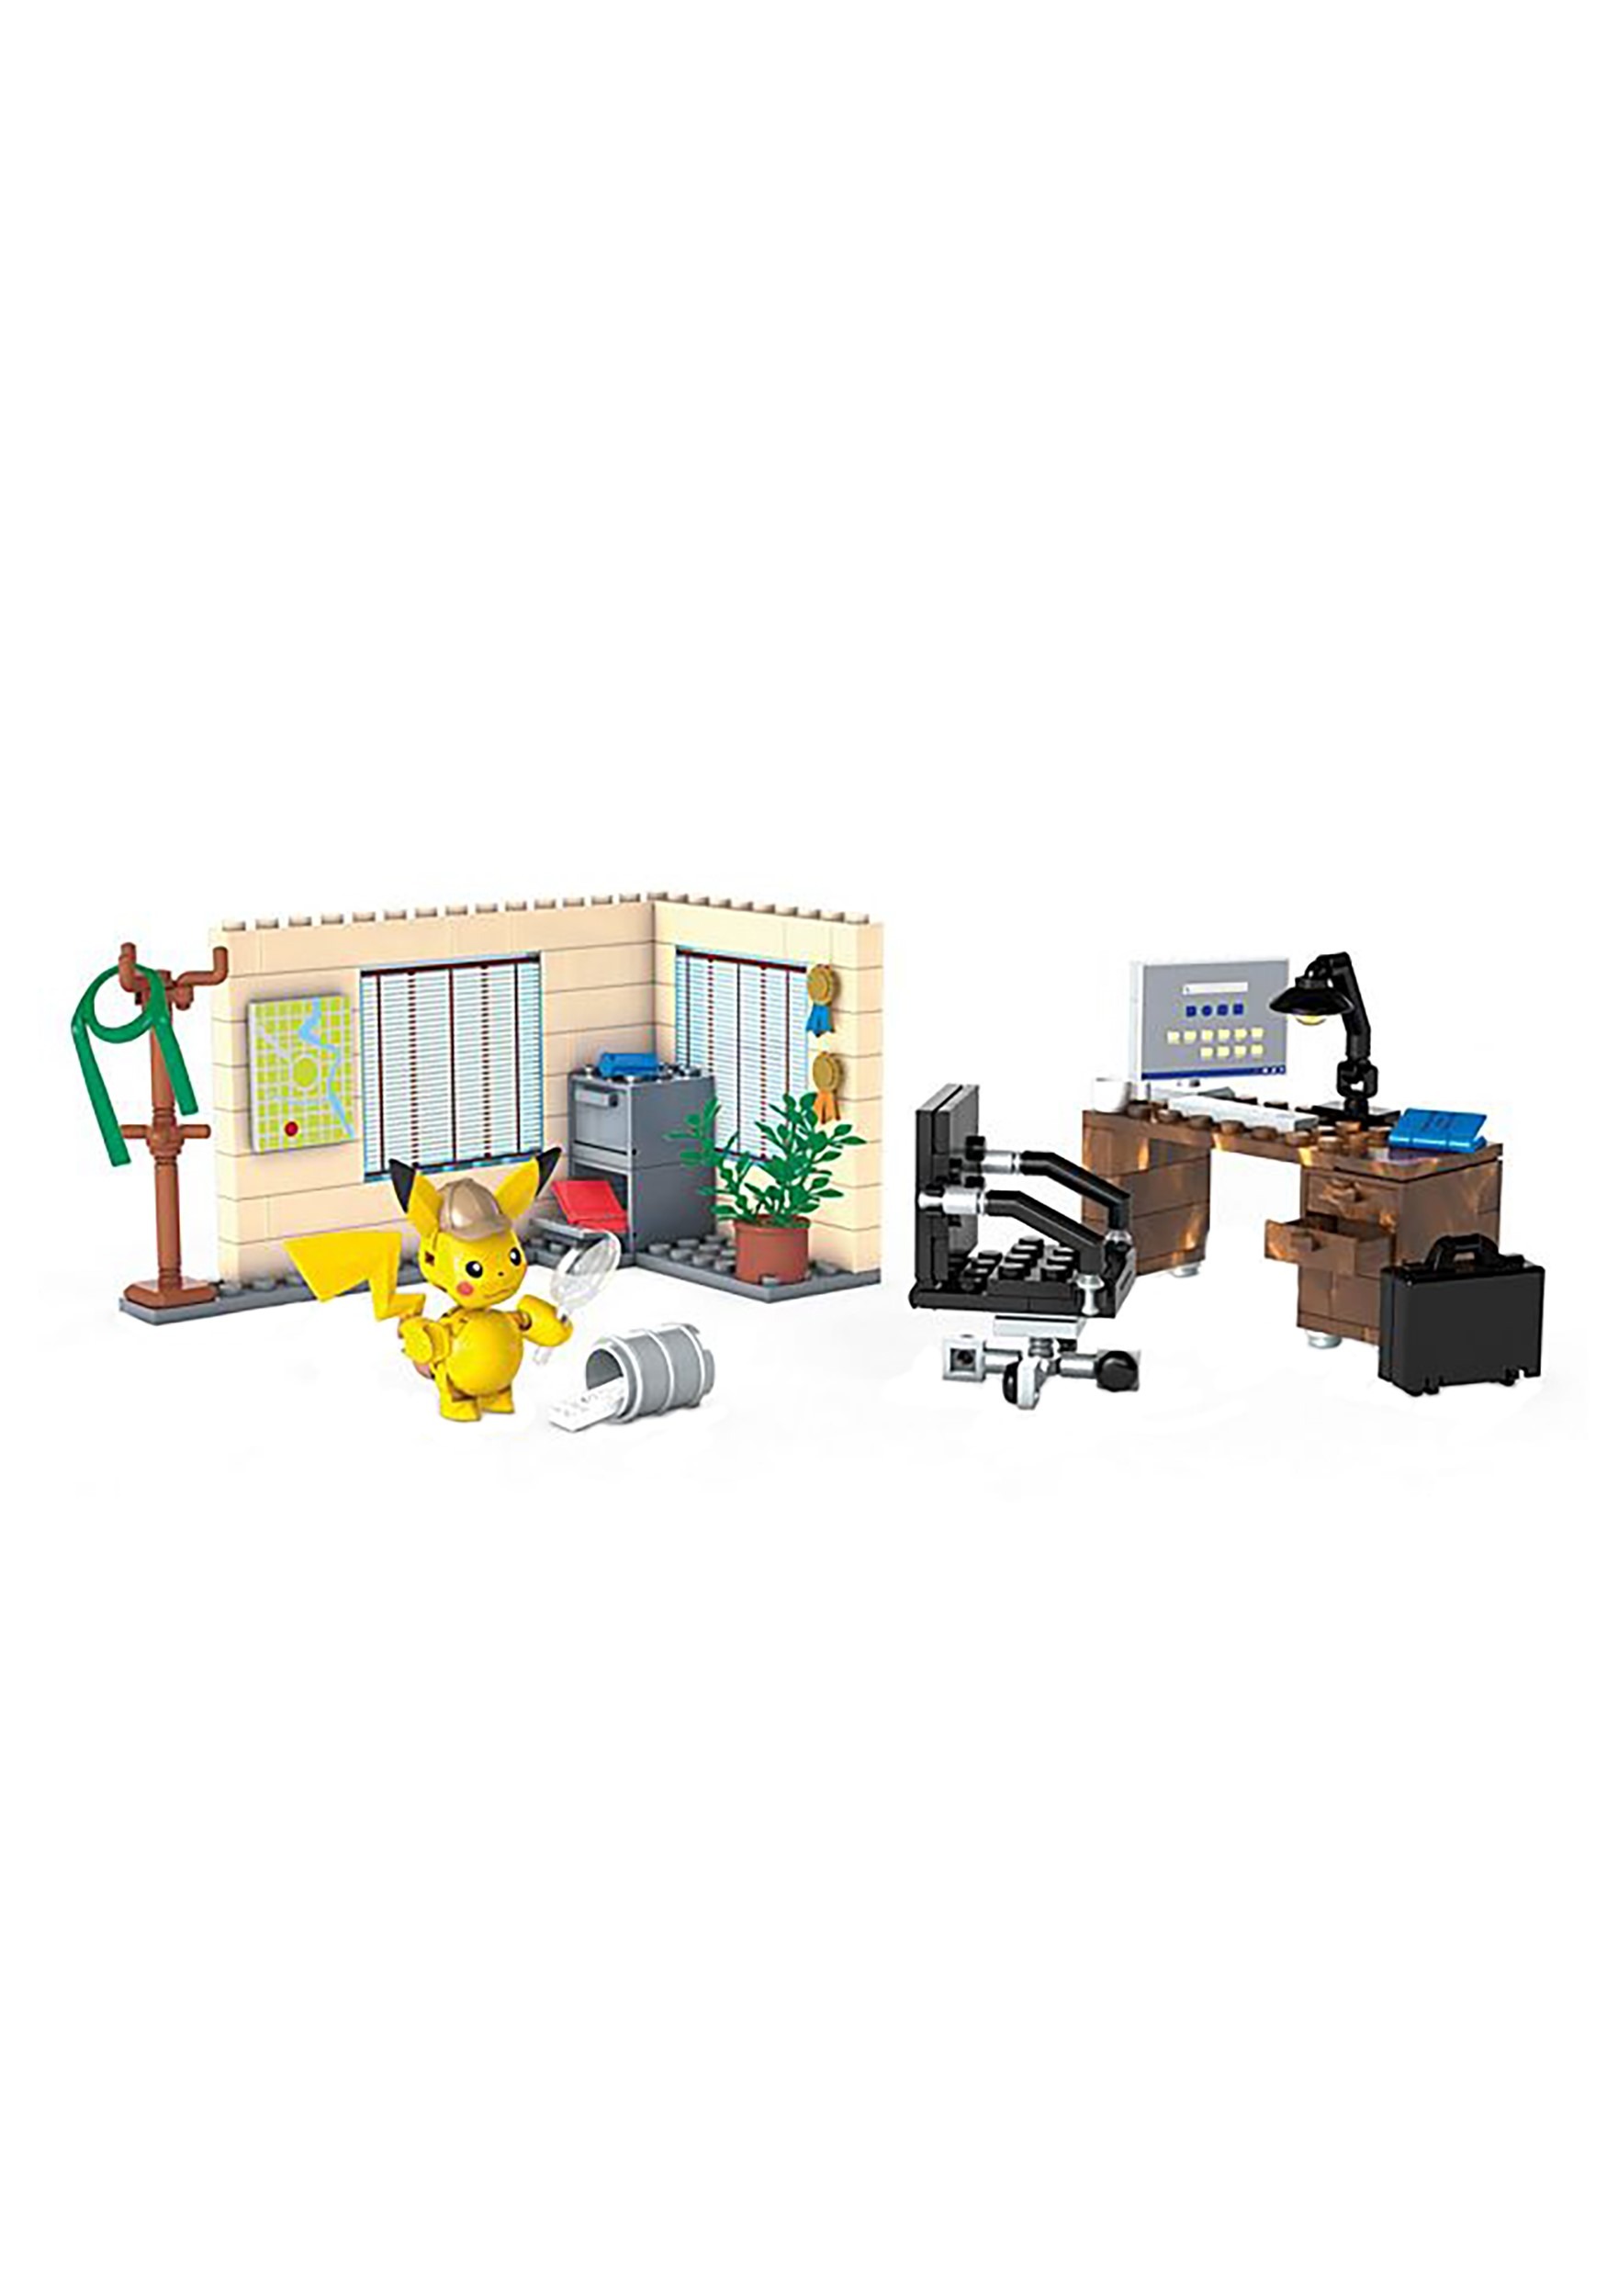 Pikachu Detective Office Playset